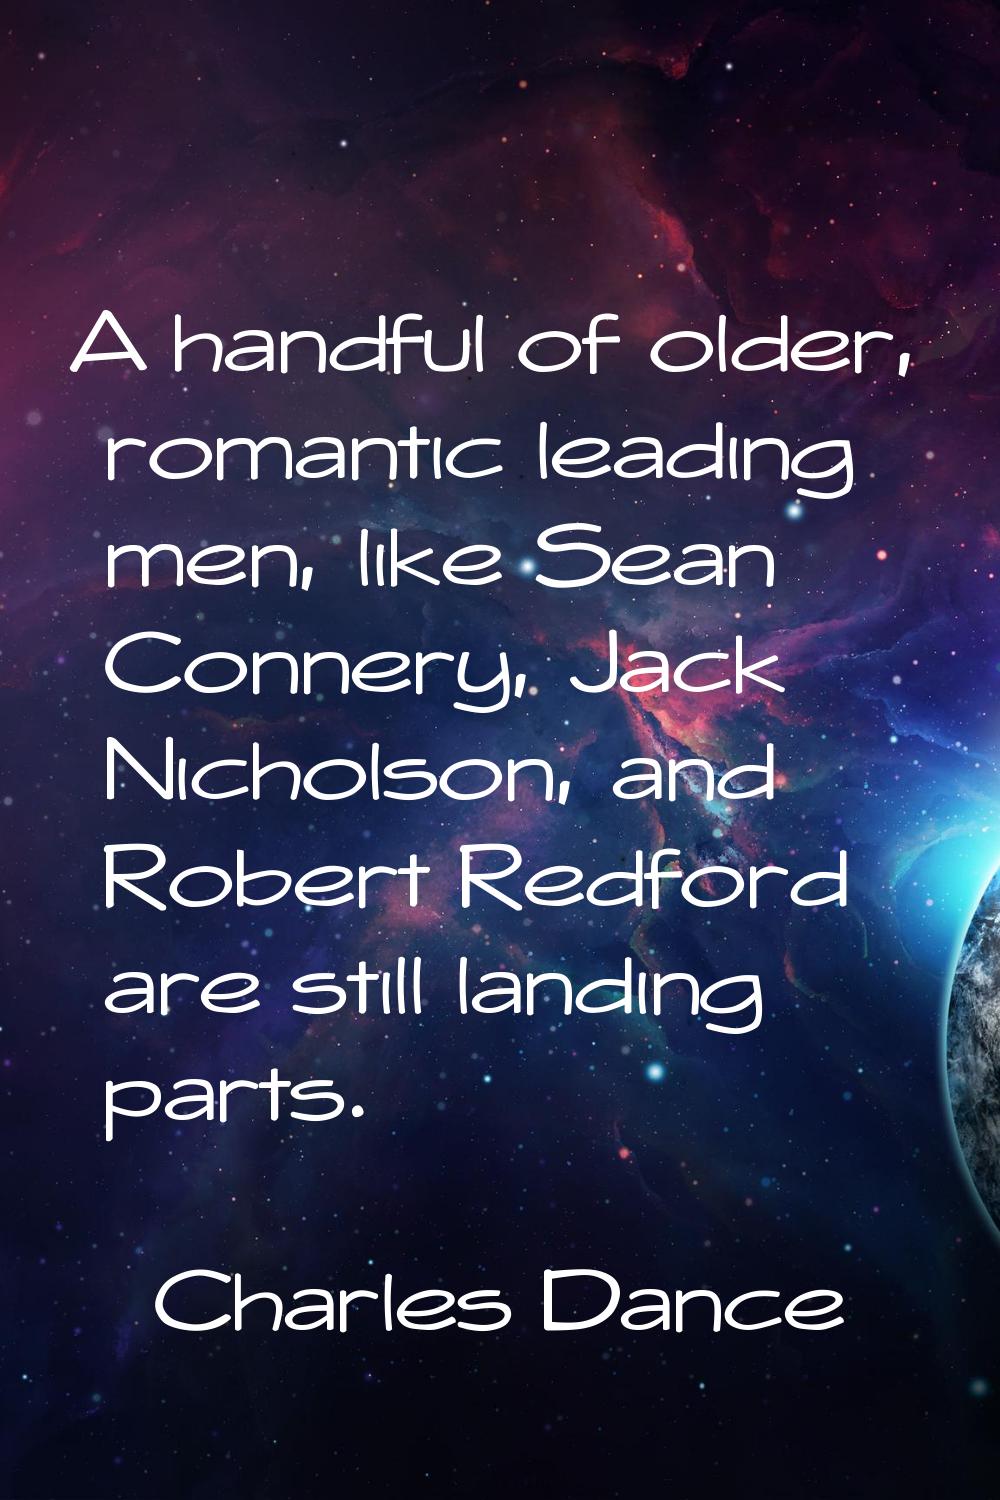 A handful of older, romantic leading men, like Sean Connery, Jack Nicholson, and Robert Redford are